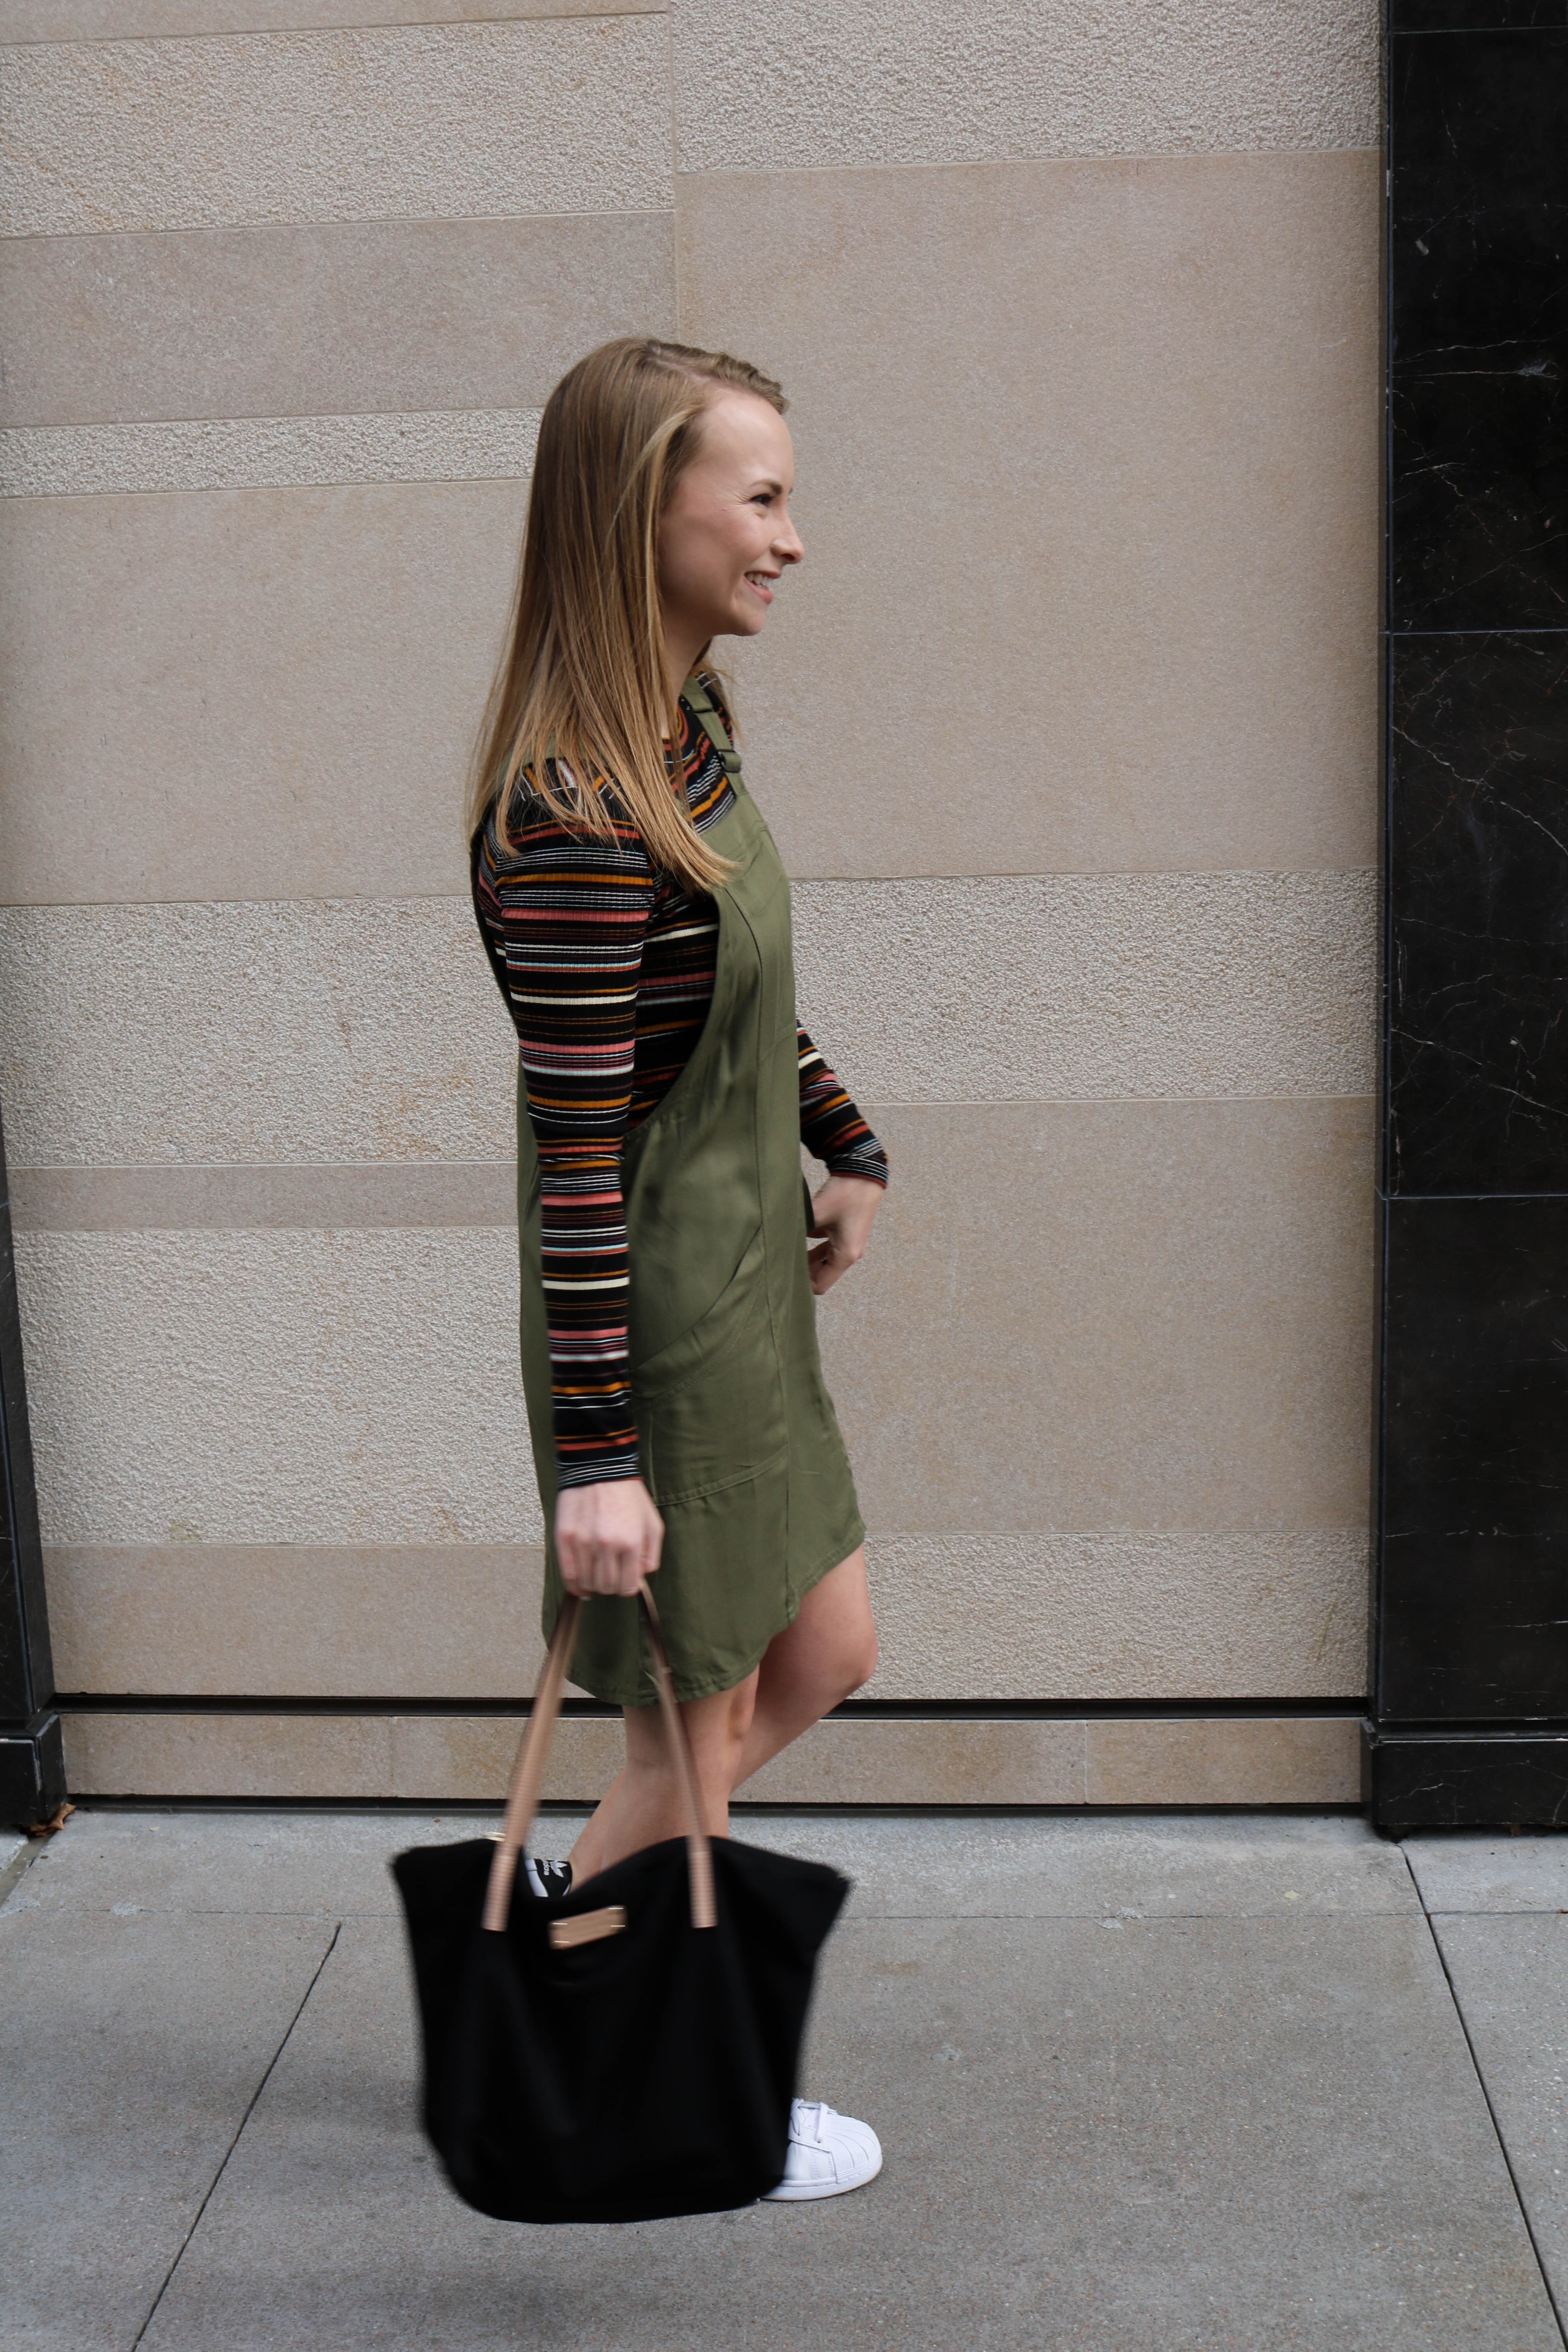 Army Green Pinafore Jumper | The long sleeve shirt underneath comes with it - so two outfits in one! I love the dark colored stripes, and paired it with some Adidas superstars to make it a bit more casual!